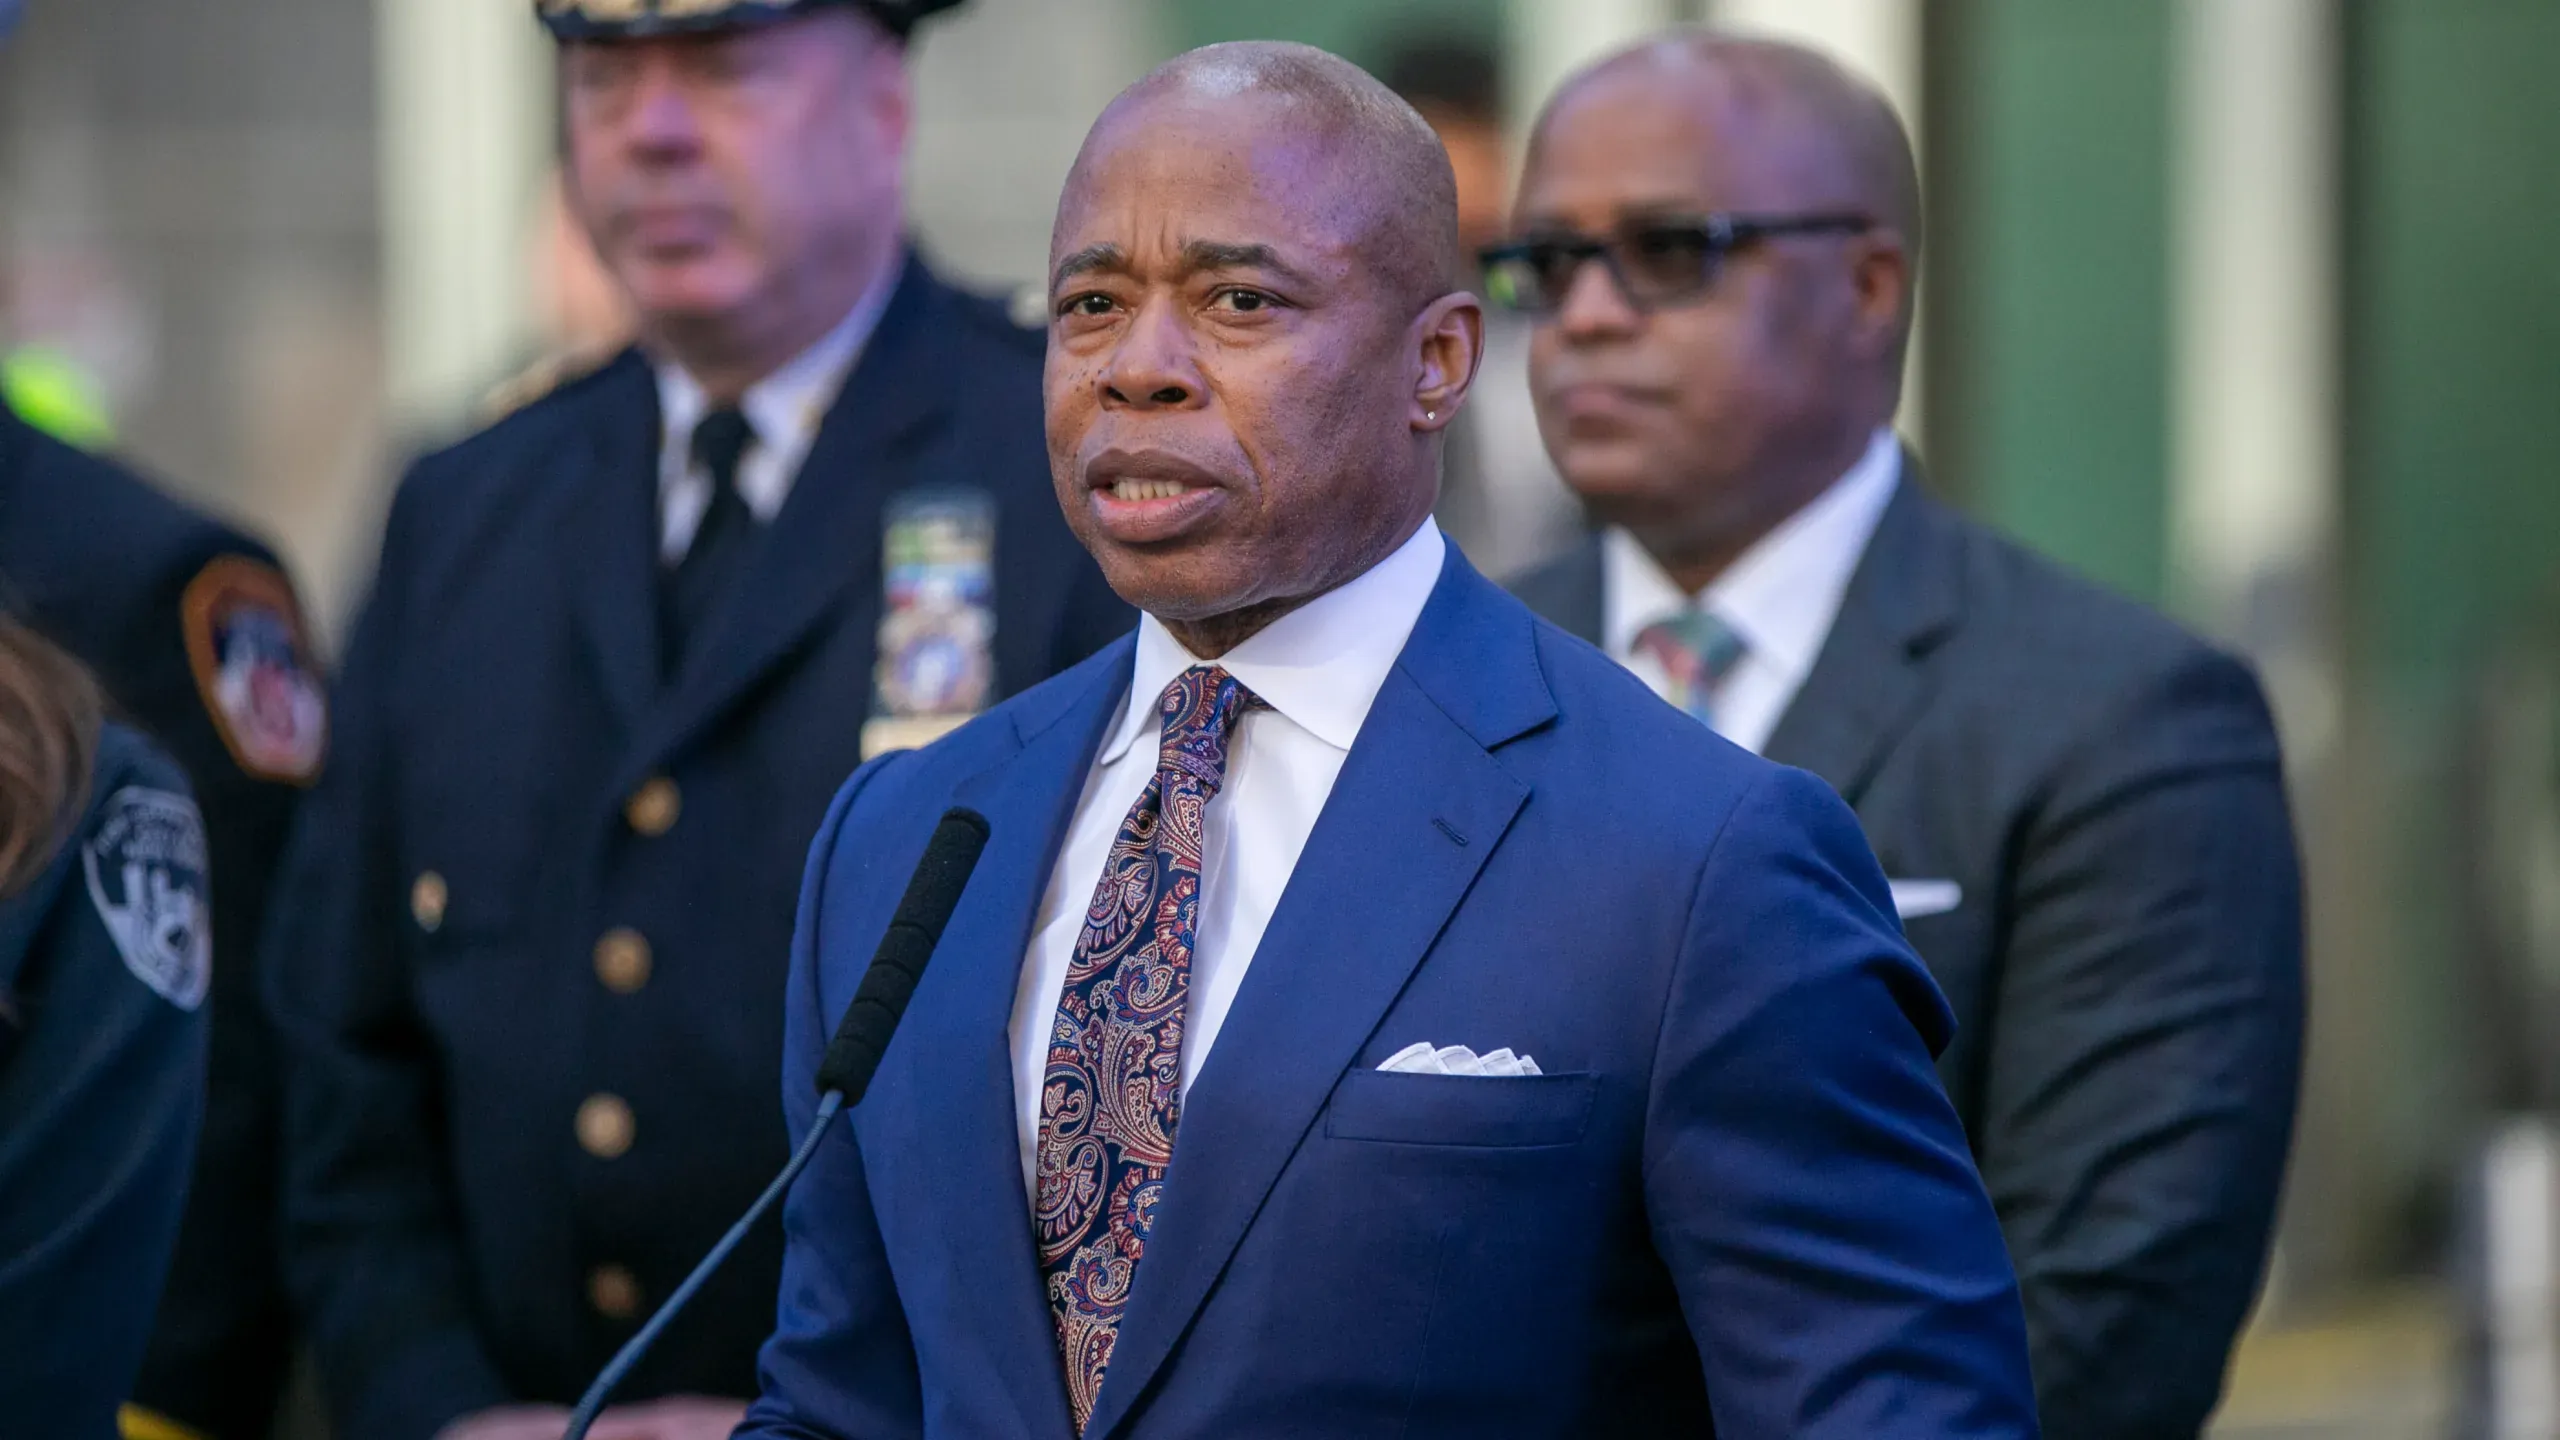 Mayor Eric Adams' message to asylum seekers: Don't come to New York City